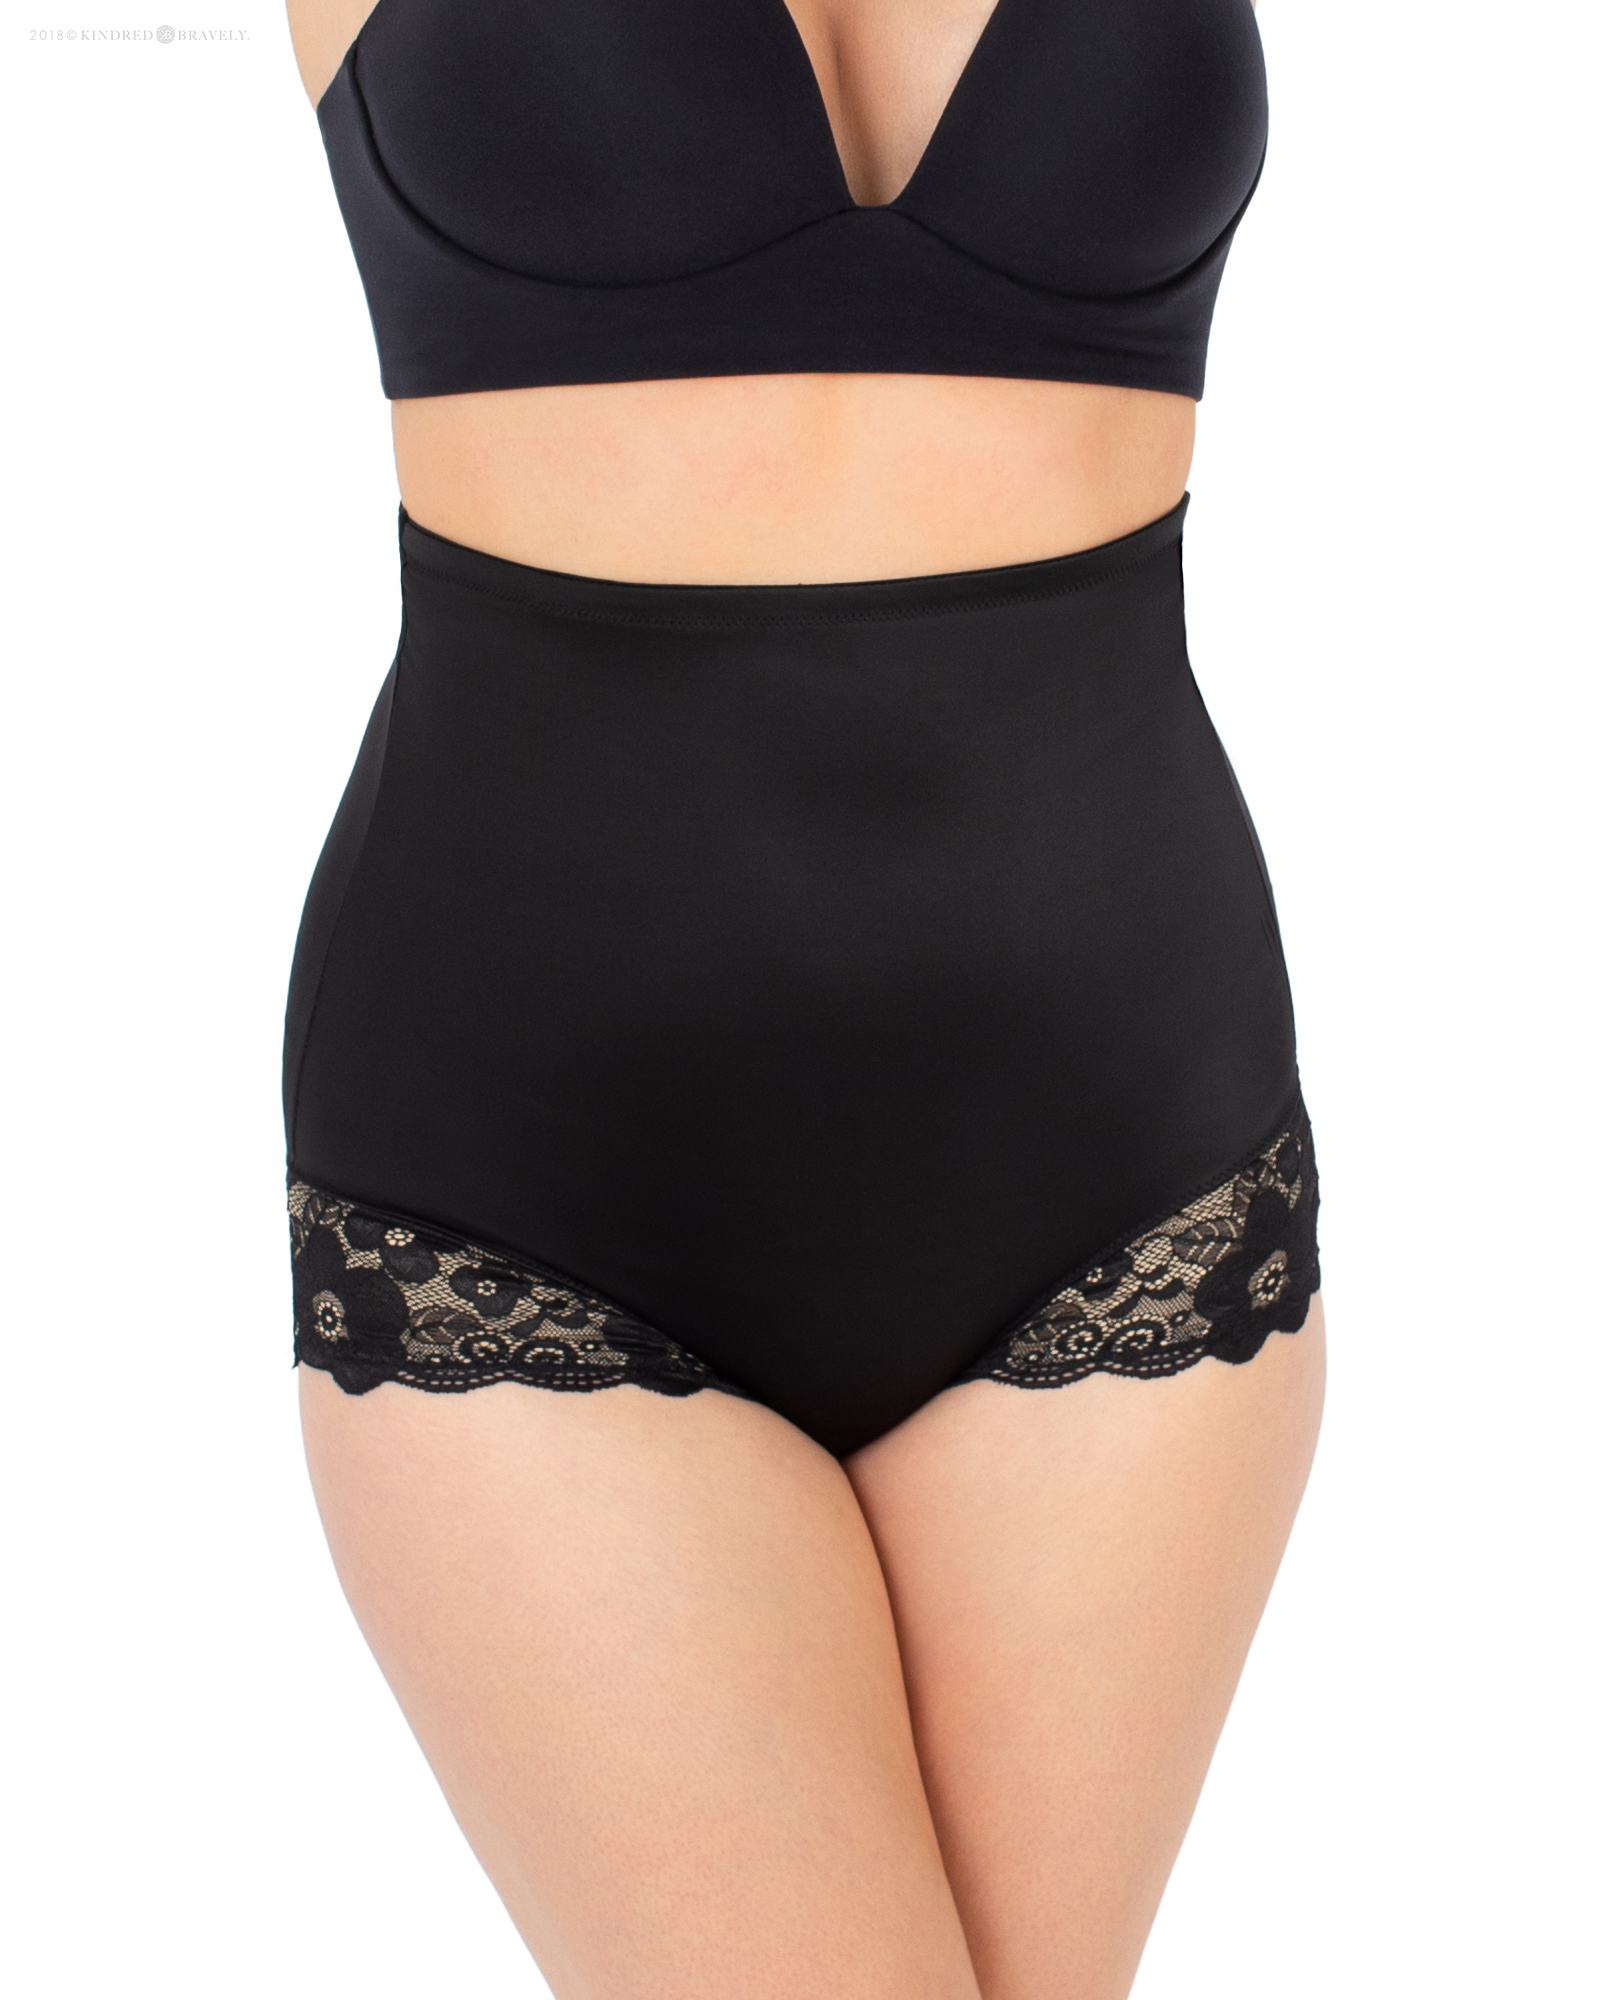 High Waisted Compression Panties